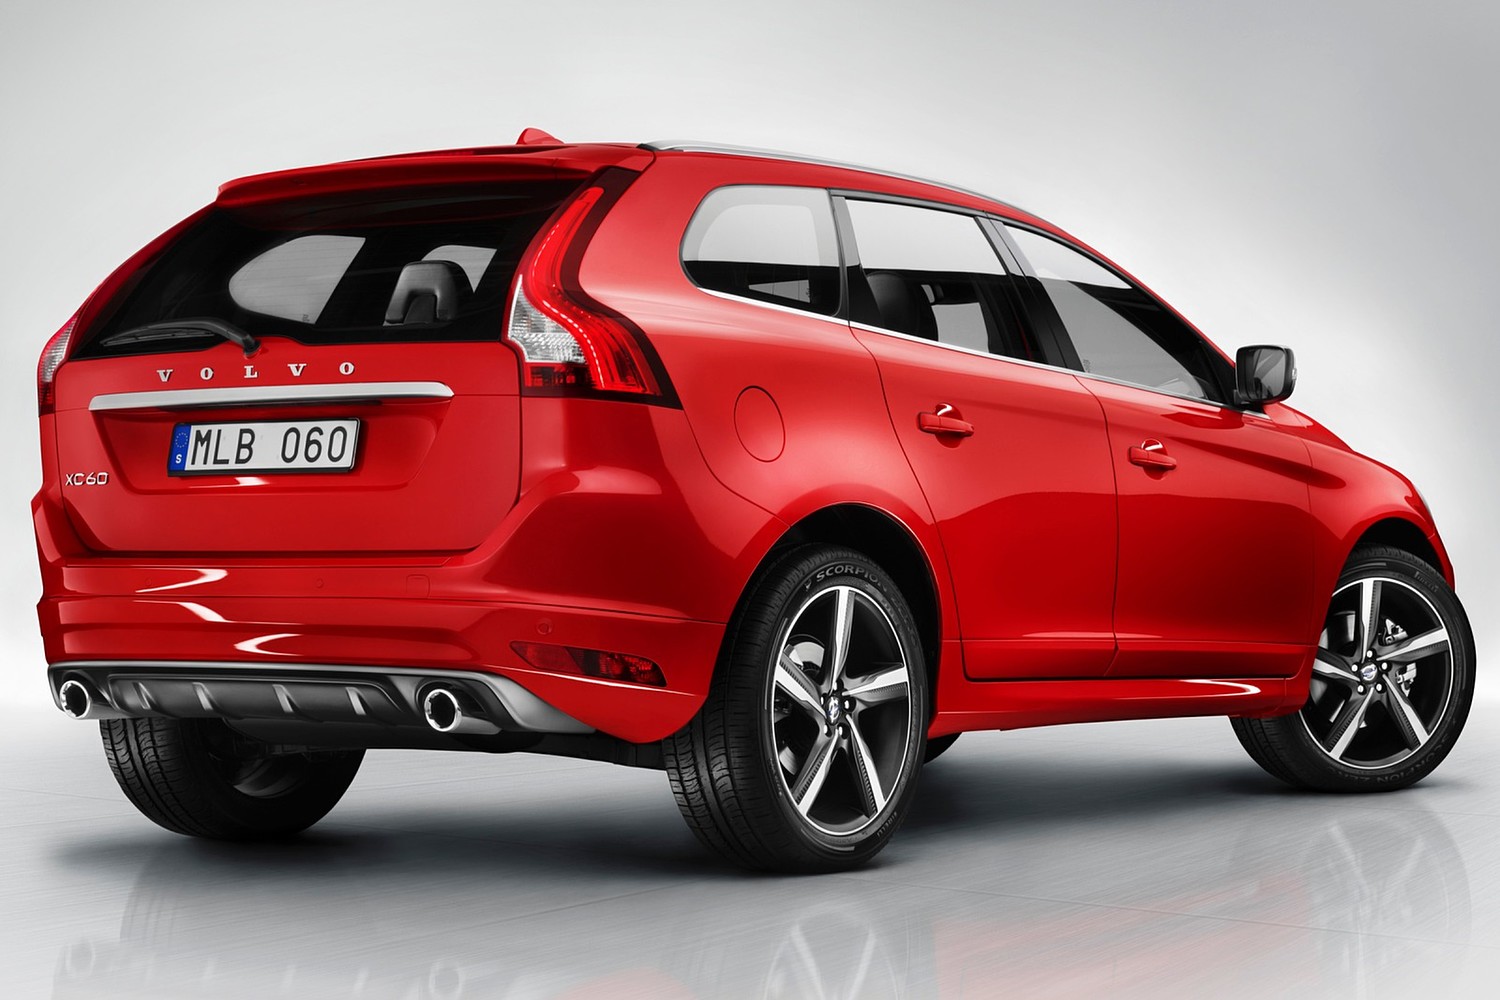 Volvo XC60 T6 R-Design 4dr SUV Exterior (2014 model year shown)